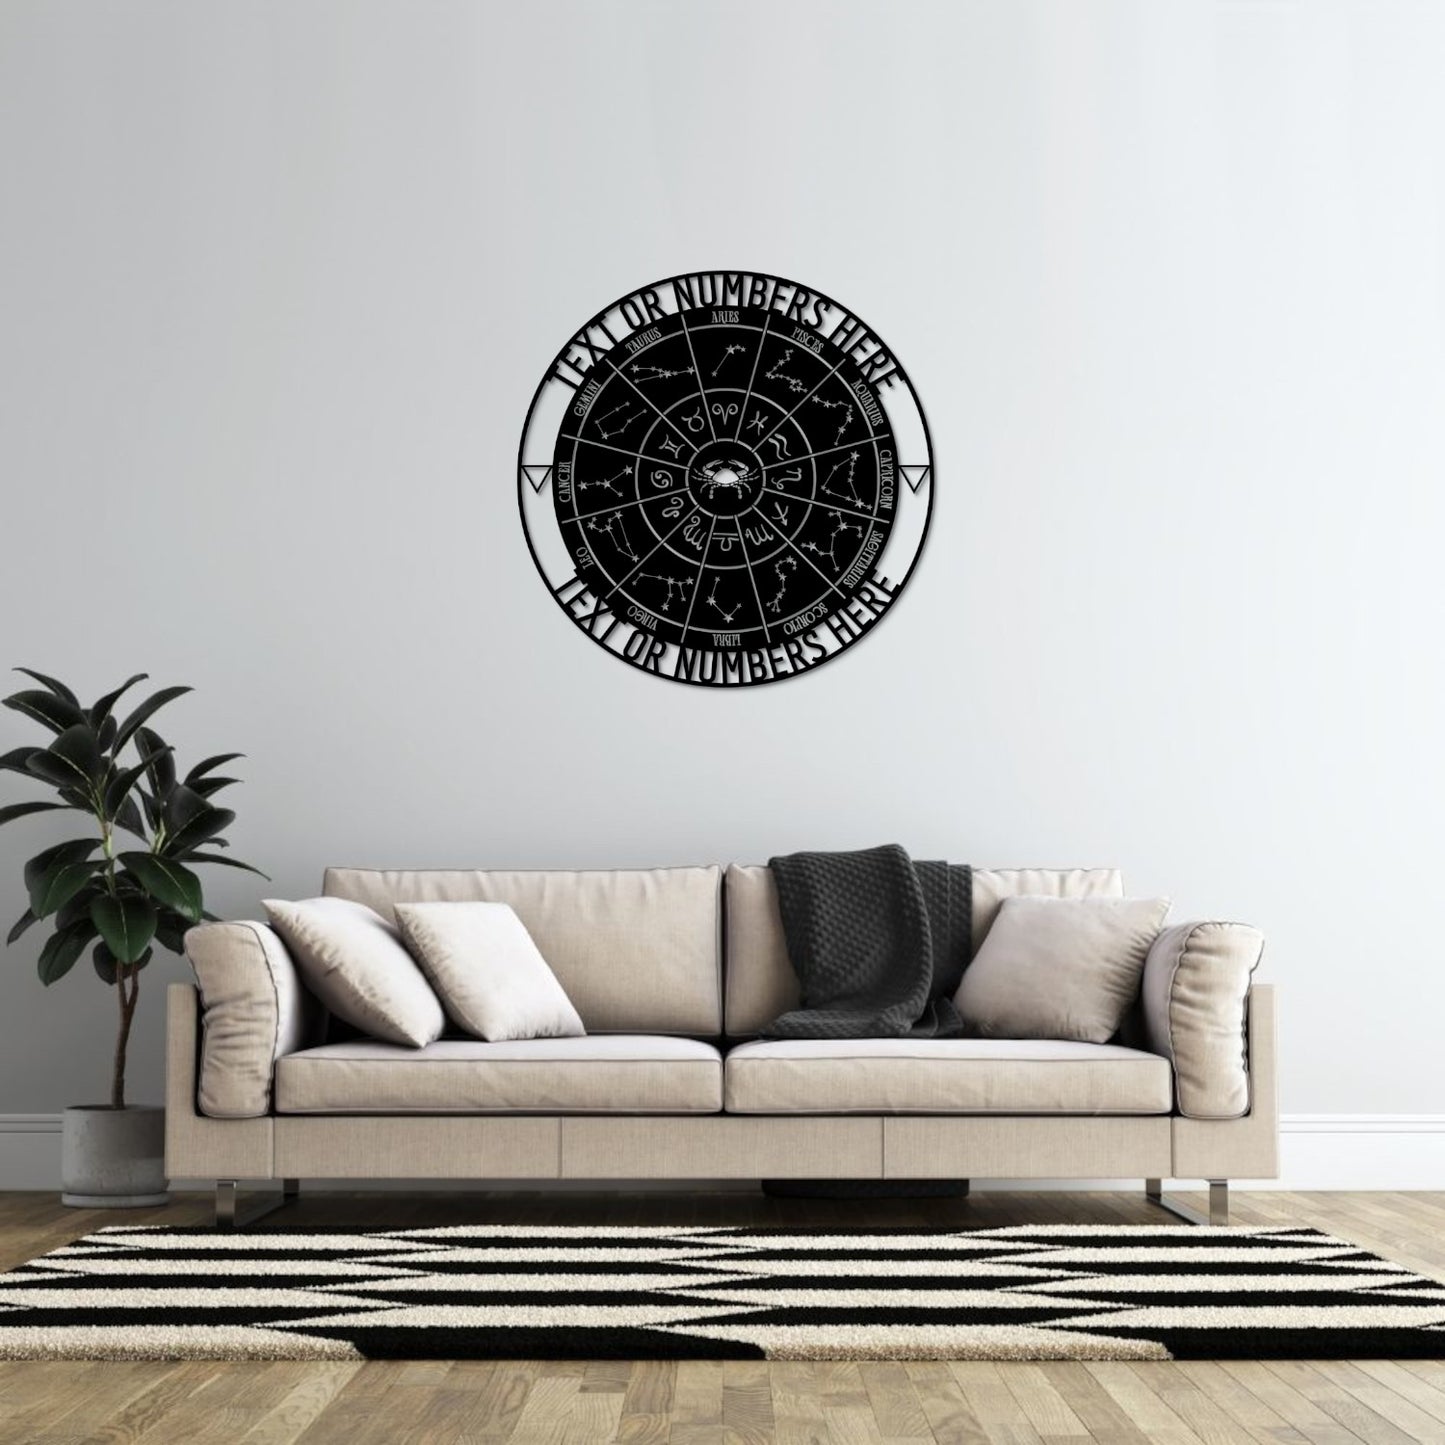 Personalized Cancer Zodiac Wheel Name Metal Sign. Custom Made Astrology Wall Decor. Celestial Gift. Decorative Cancer Star Sign Wall Hanging